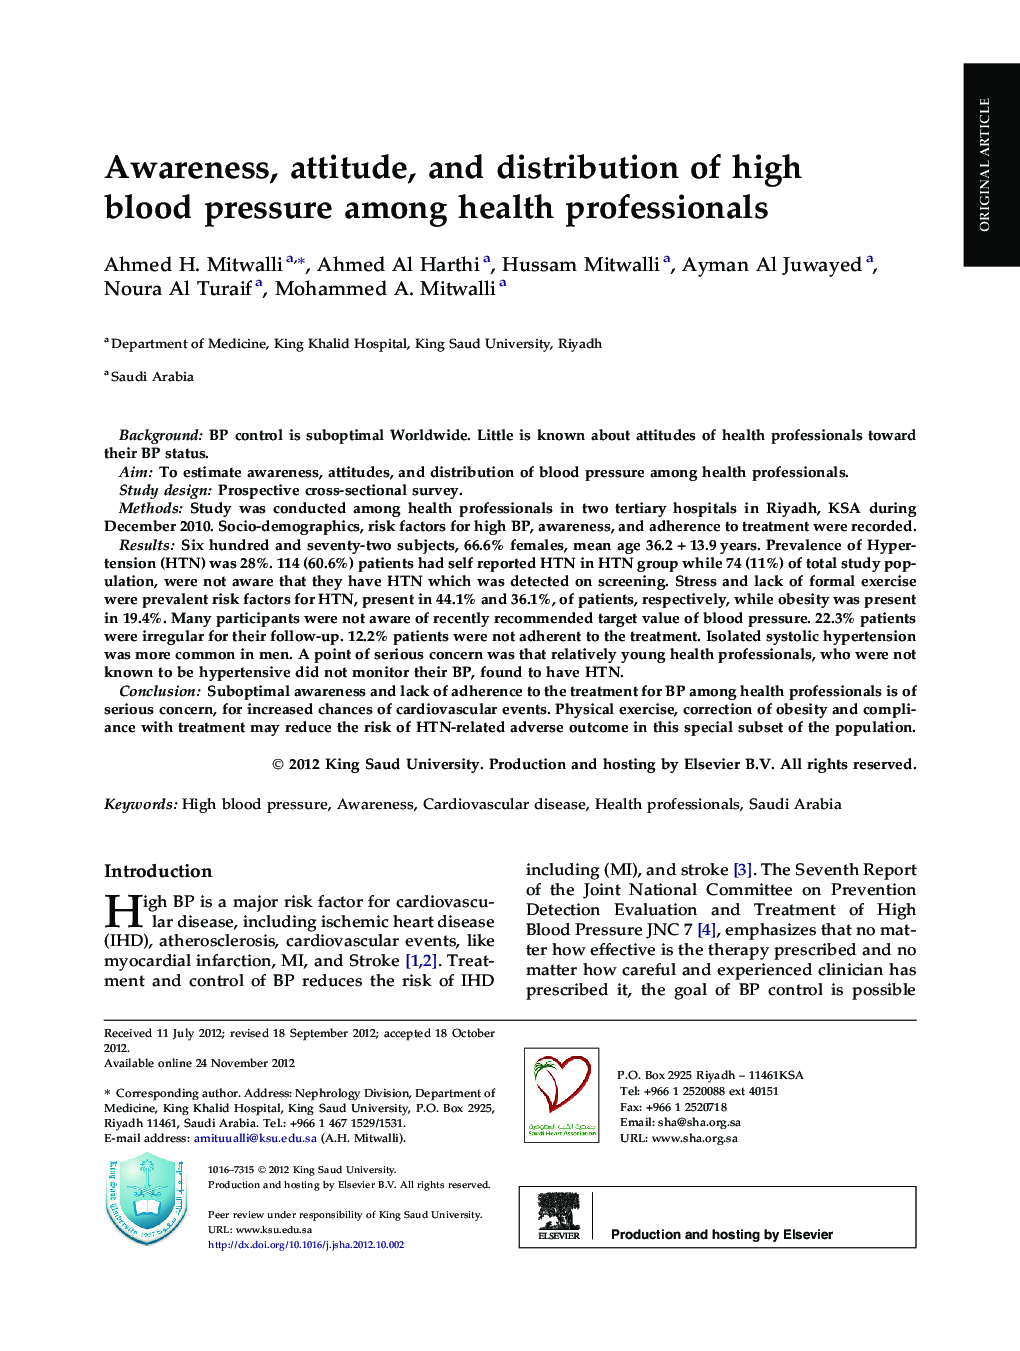 Awareness, attitude, and distribution of high blood pressure among health professionals 